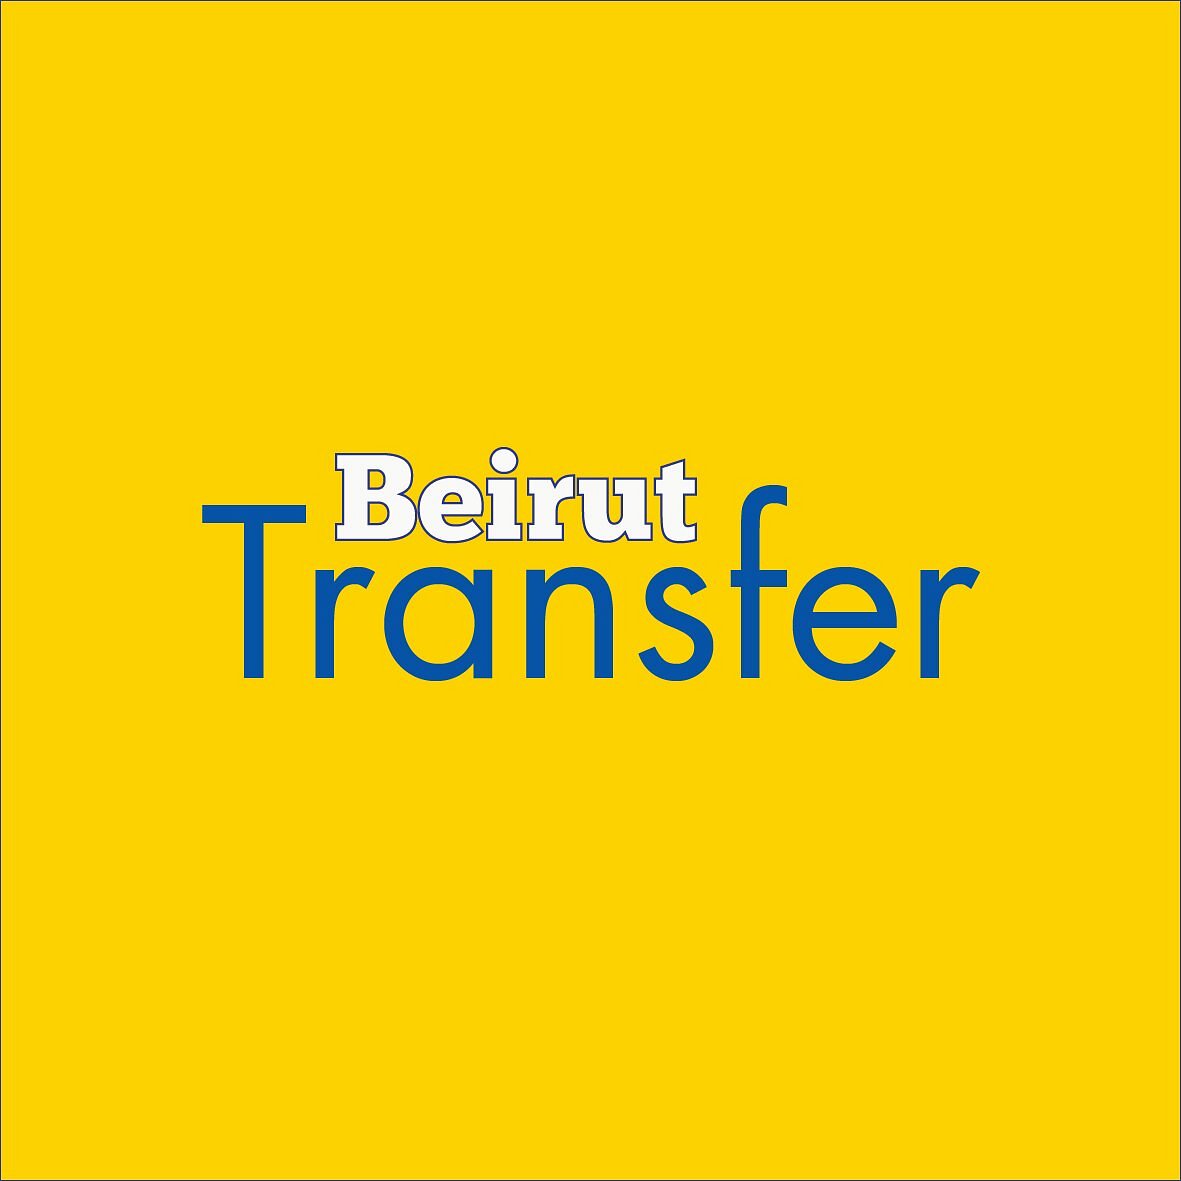 Beirut Airport Transfer - Day Tours - All You Need to Know BEFORE You Go